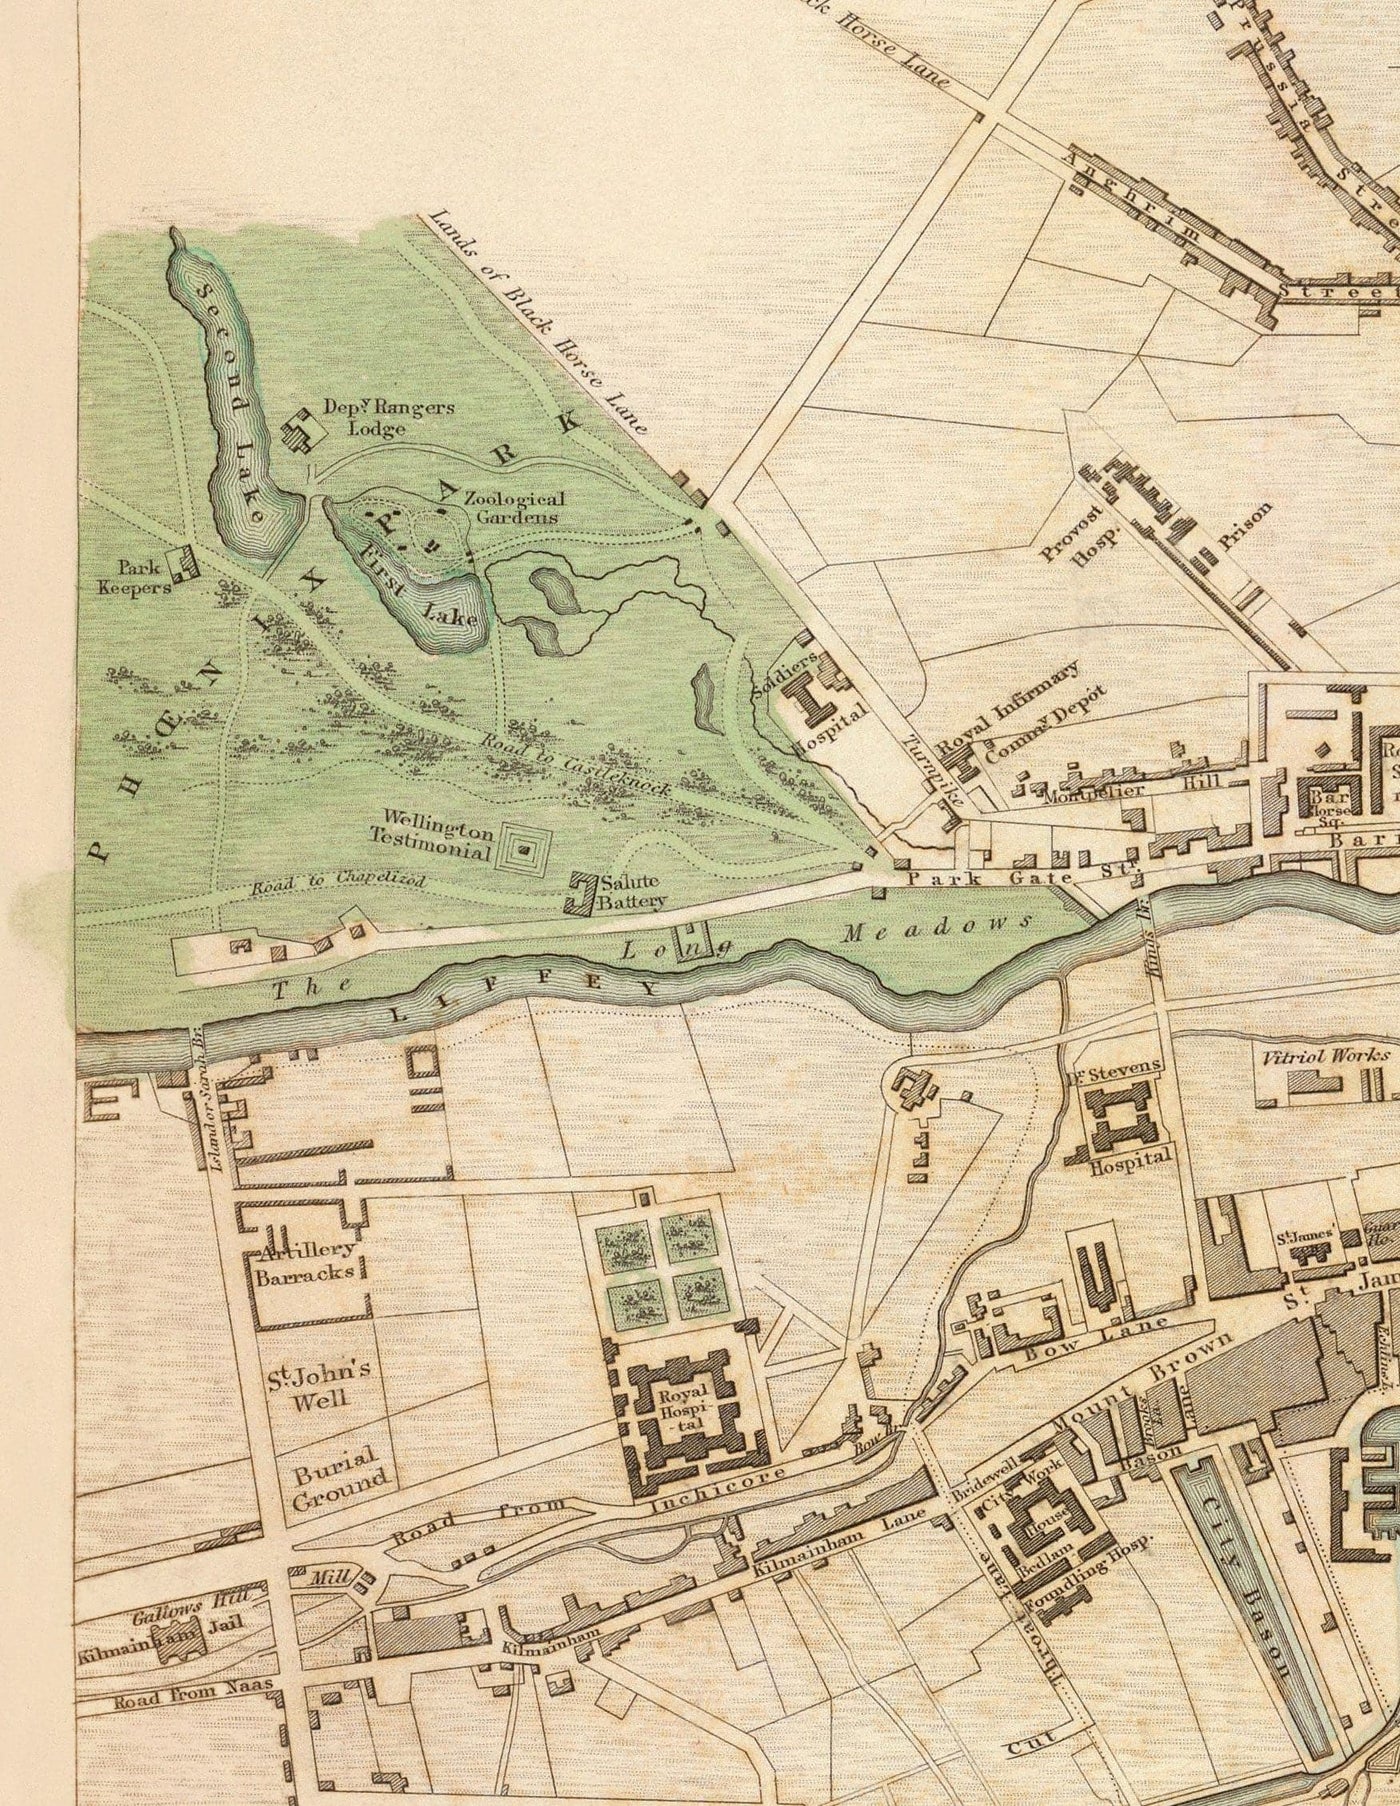 Old Map of Dublin, Ireland in 1836 by WB Clark - River Liffey, Leinster, County Dublin